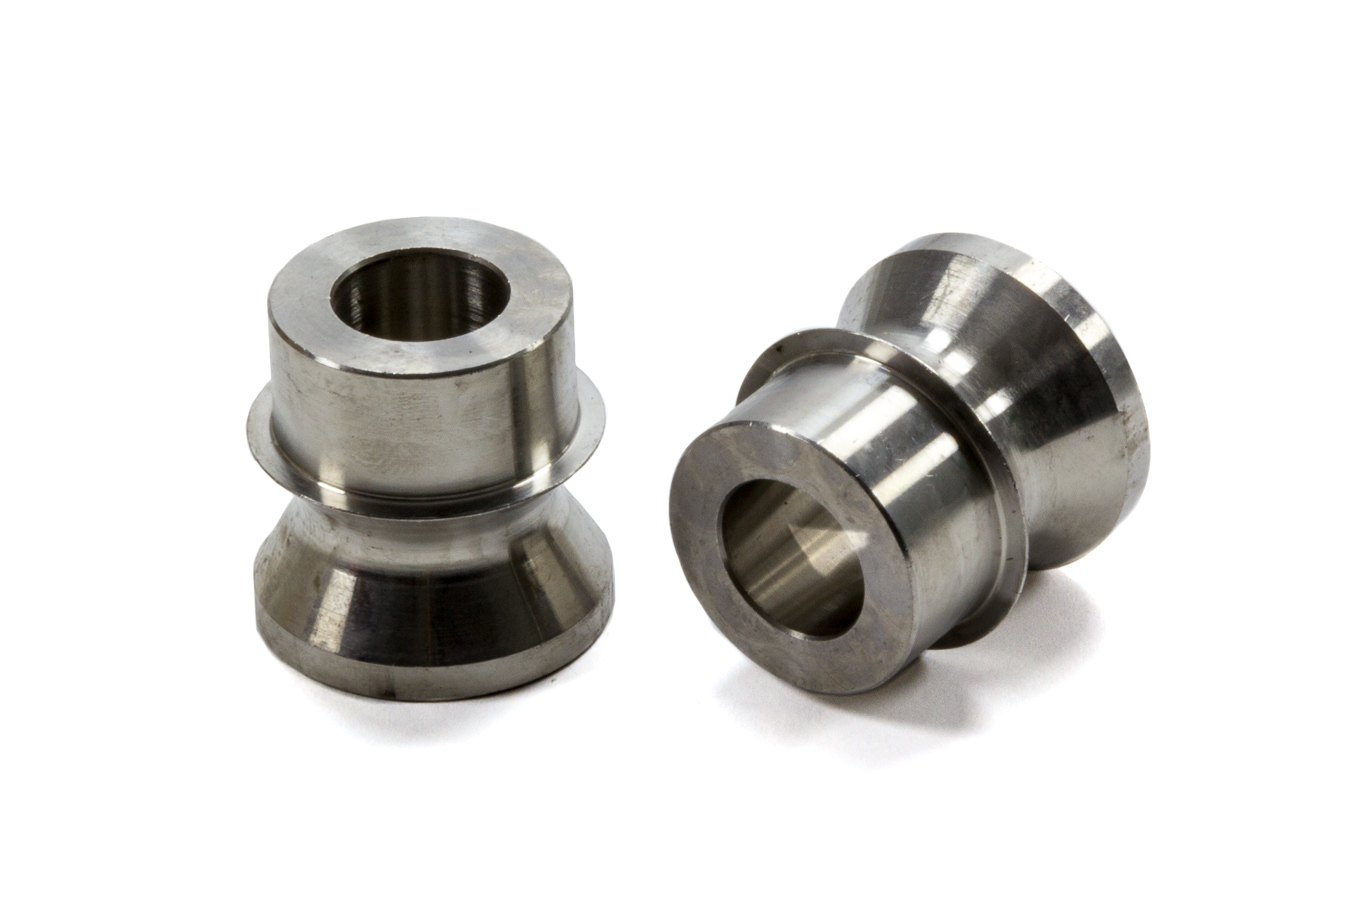 FK Rod Ends 10-8HB Rod End Bushing, 5/8 to 1/2 in Bore, High Misalignment, Steel, Natural, Pair